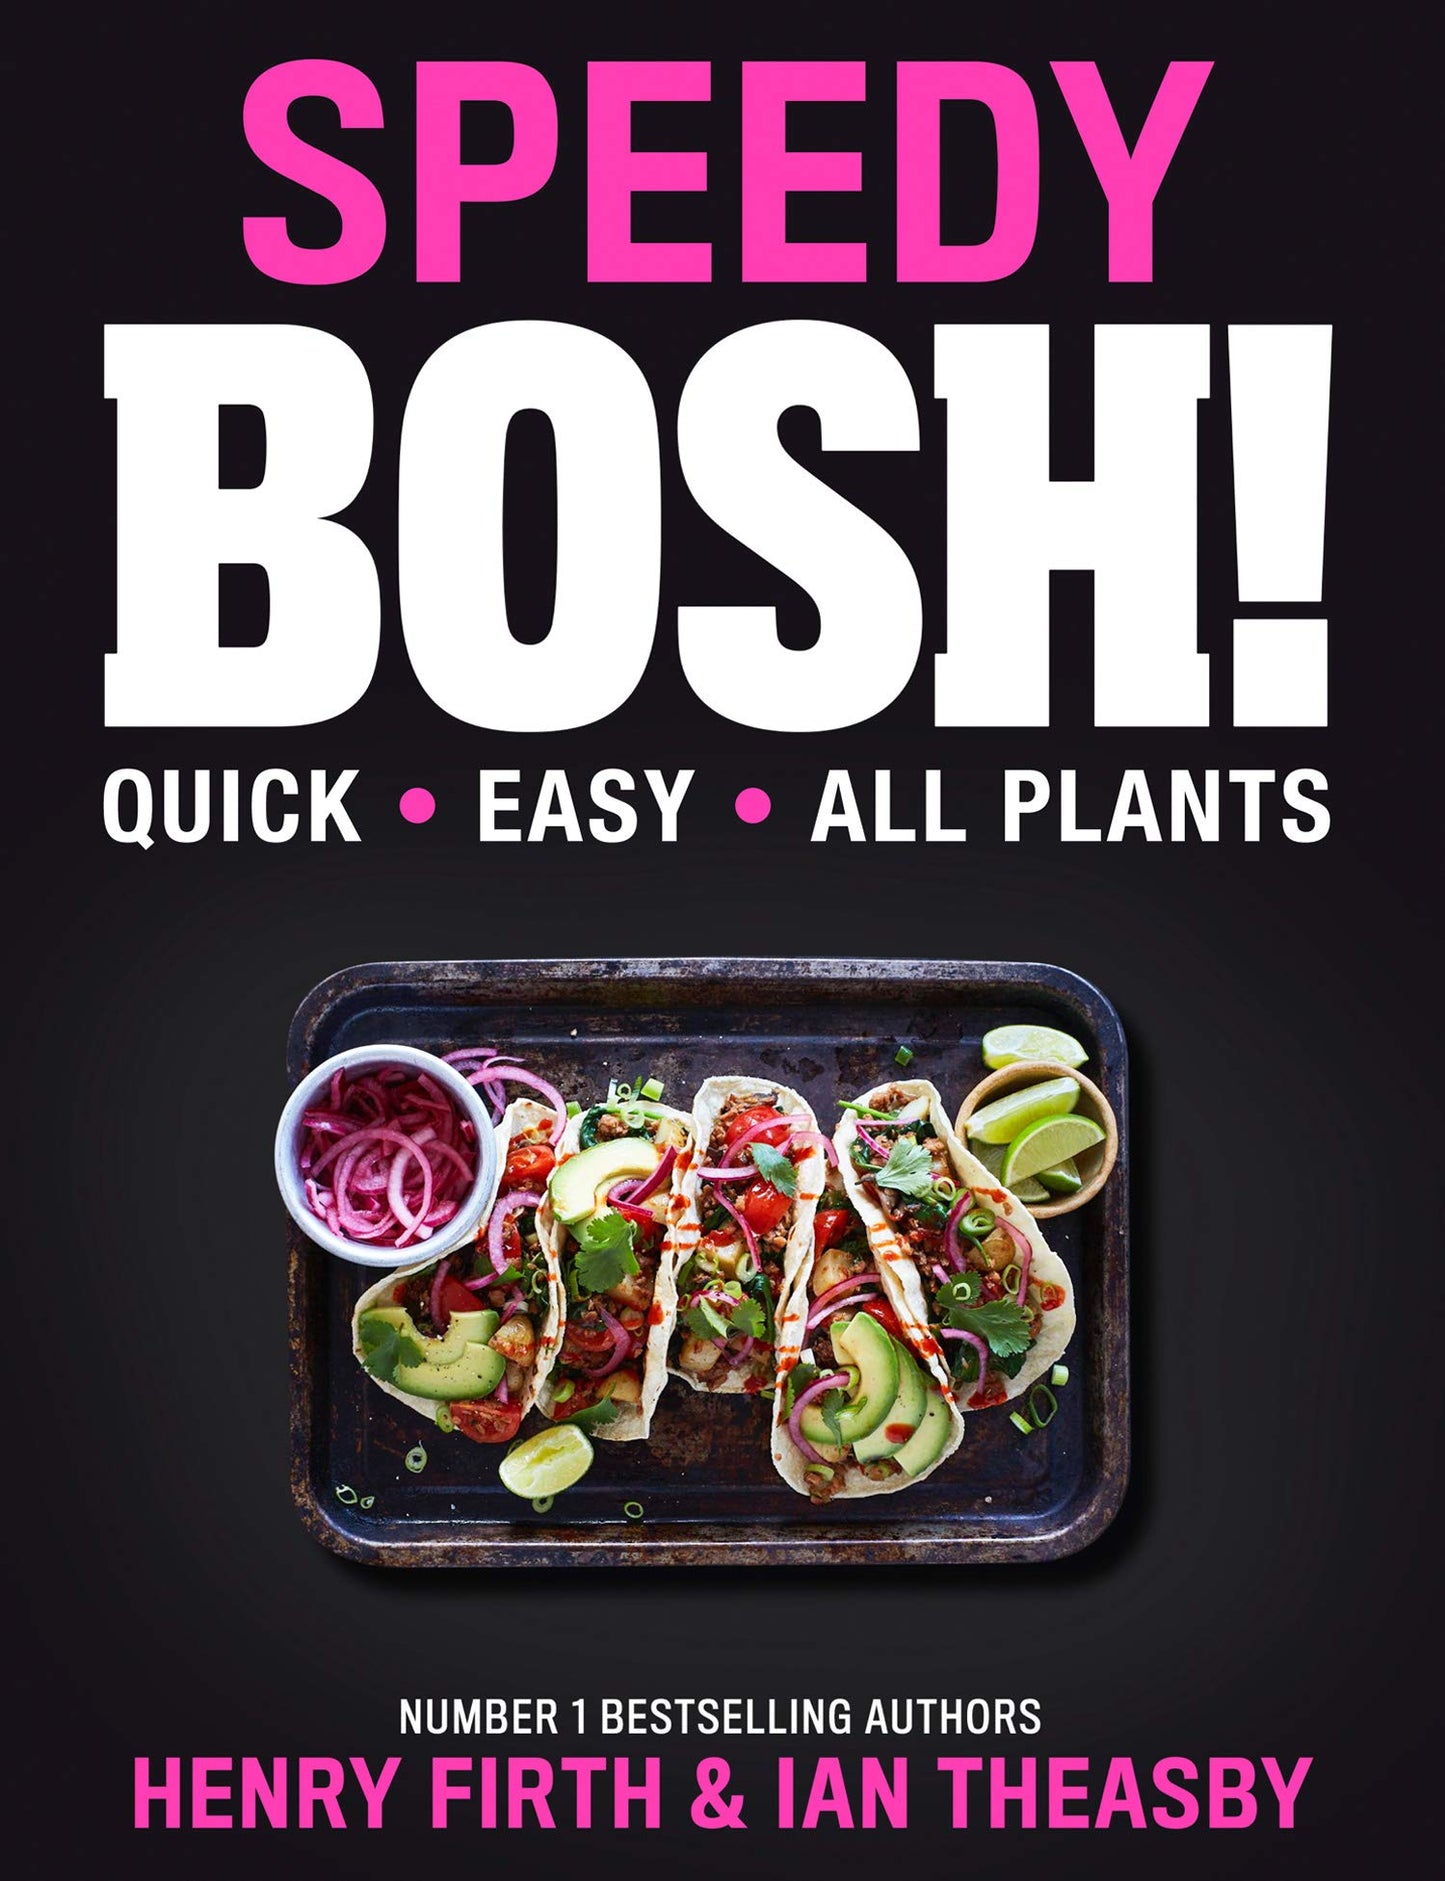 Speedy BOSH!: Over 100 New Quick and Easy Plant-Based Meals in 30 Minutes from the Authors of the Highest Selling Vegan Cookbook Ever - Henry Firth and Ian Theasby